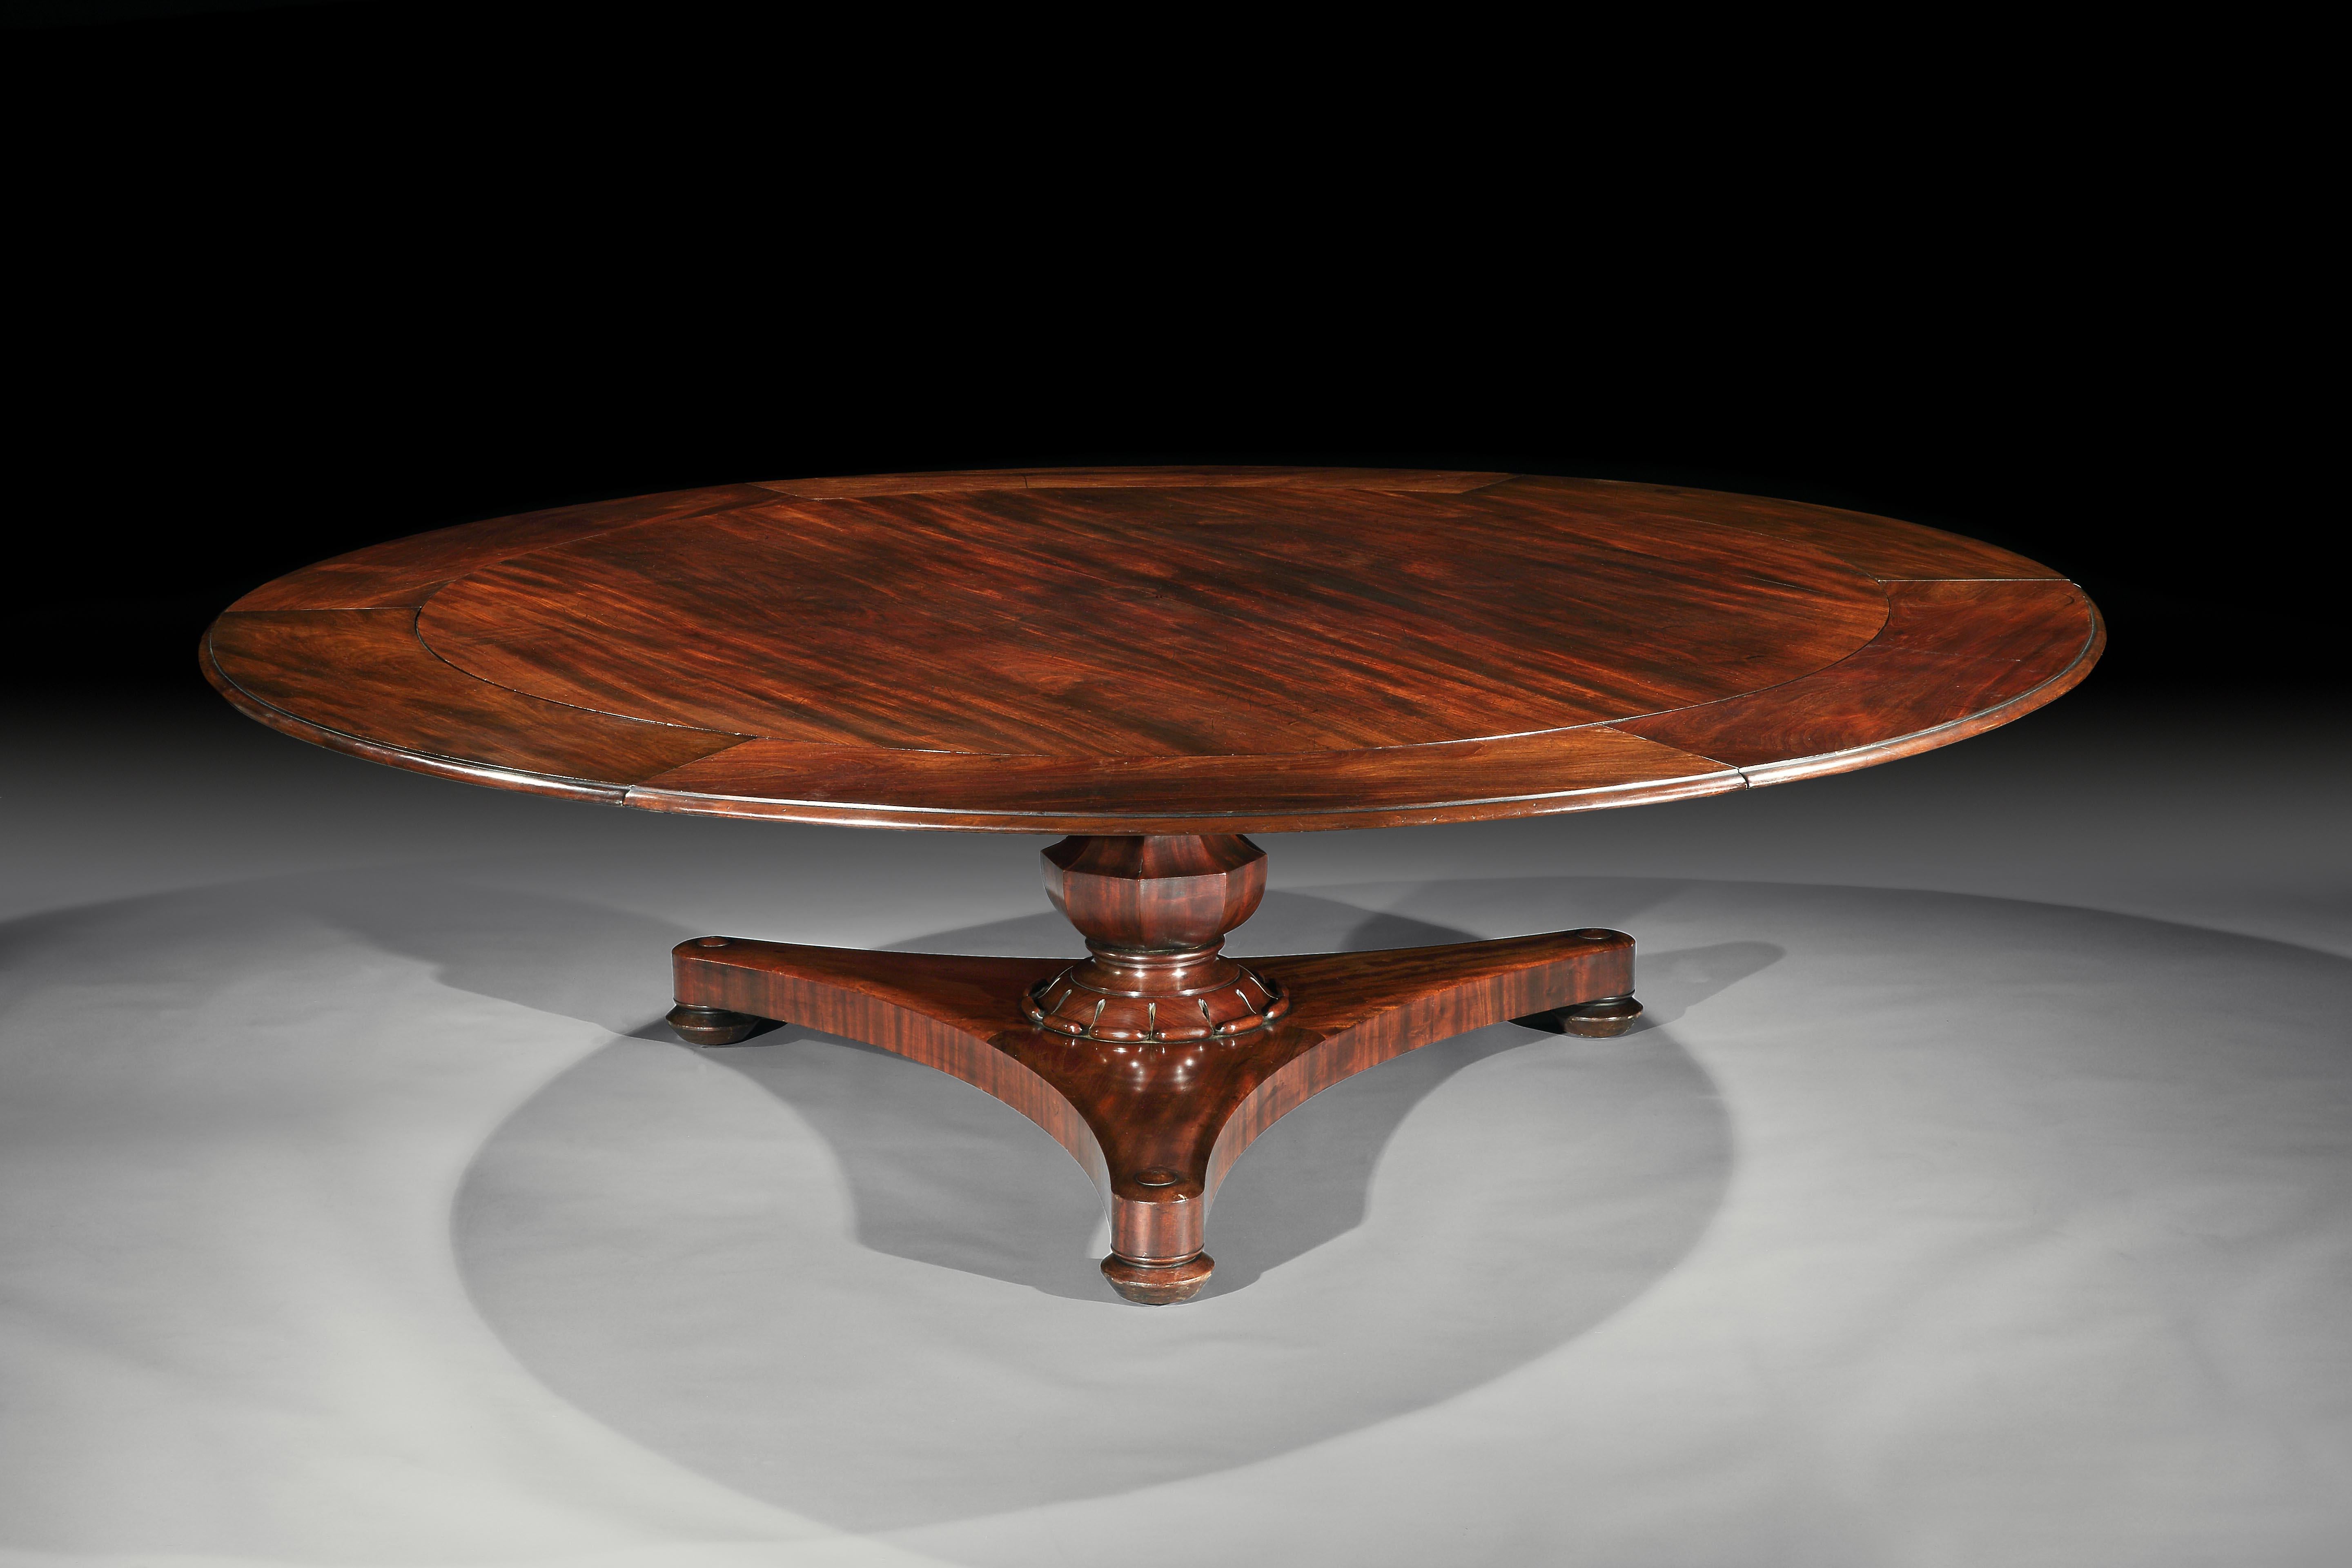 An extremely rare very large regency mahogany round dining table, resting on a turned central column, with lotus leaf carving, on a large plate-form base, with turned feet and concealed castors.
English, Circa 1835
Measures: Diameter, without